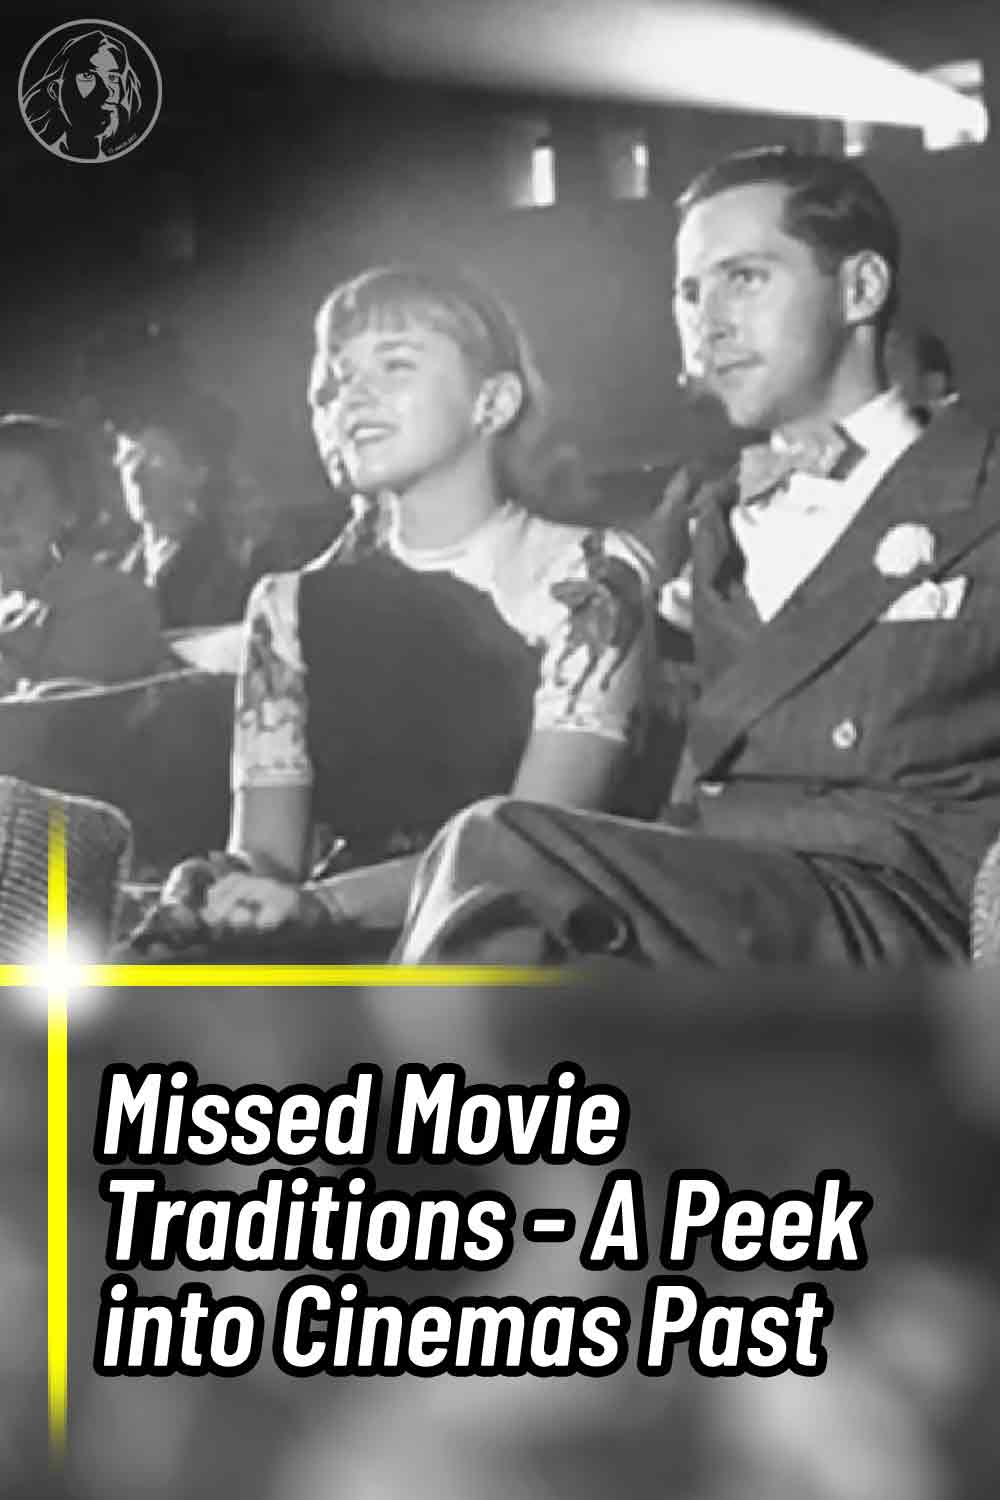 Missed Movie Traditions - A Peek into Cinemas Past